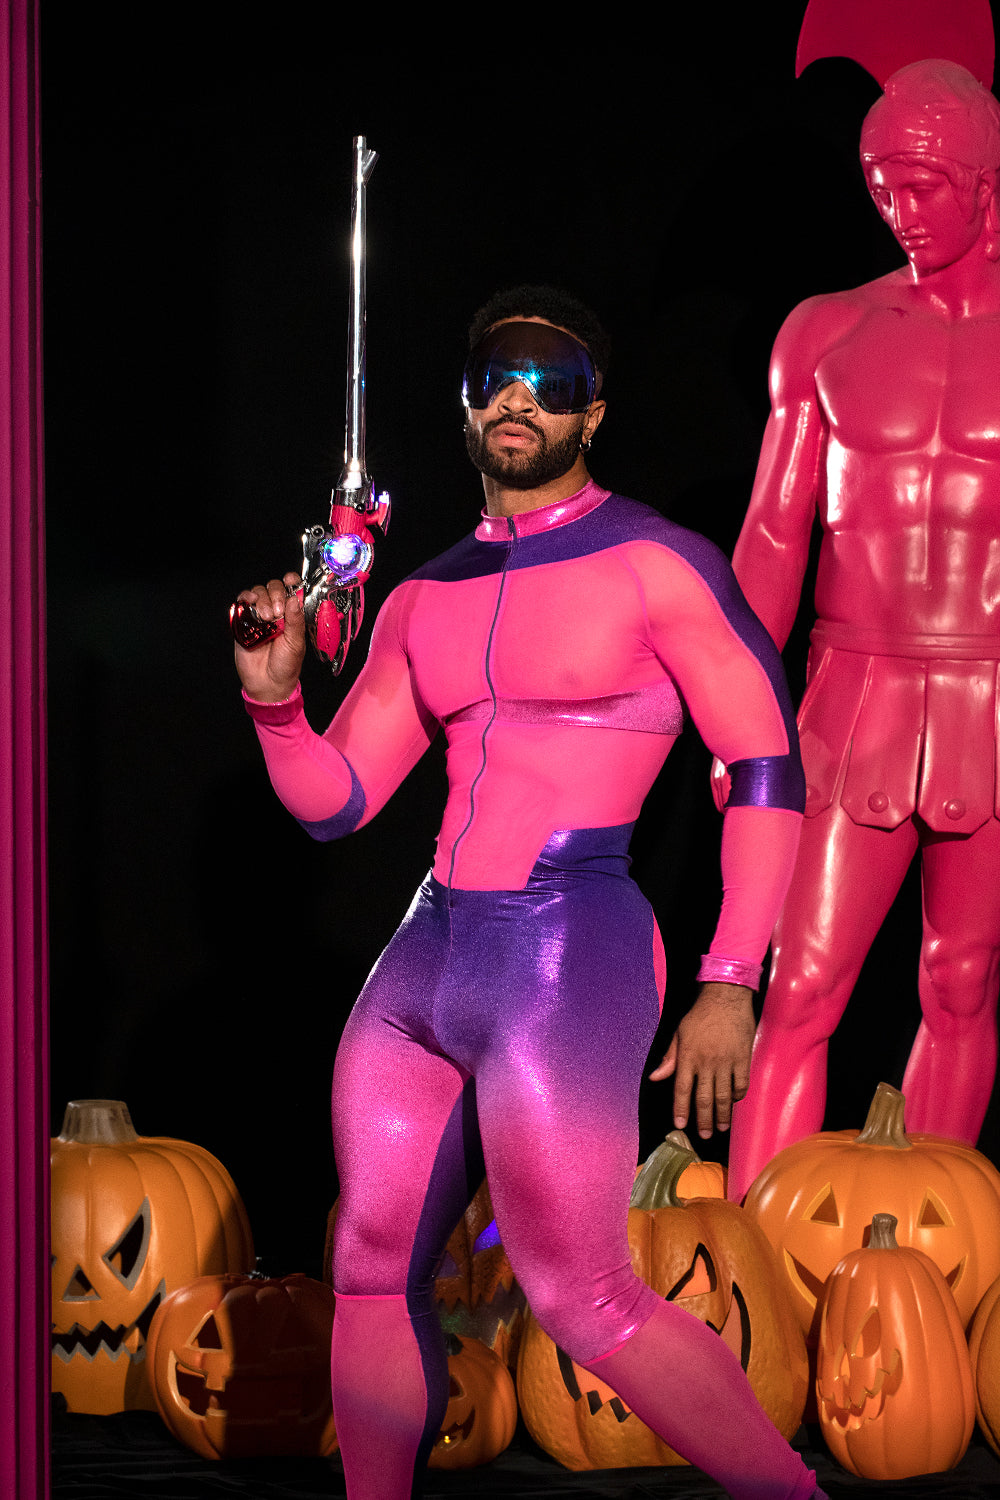 Pink and Purple Metallic Space Suit - Slick It Up 